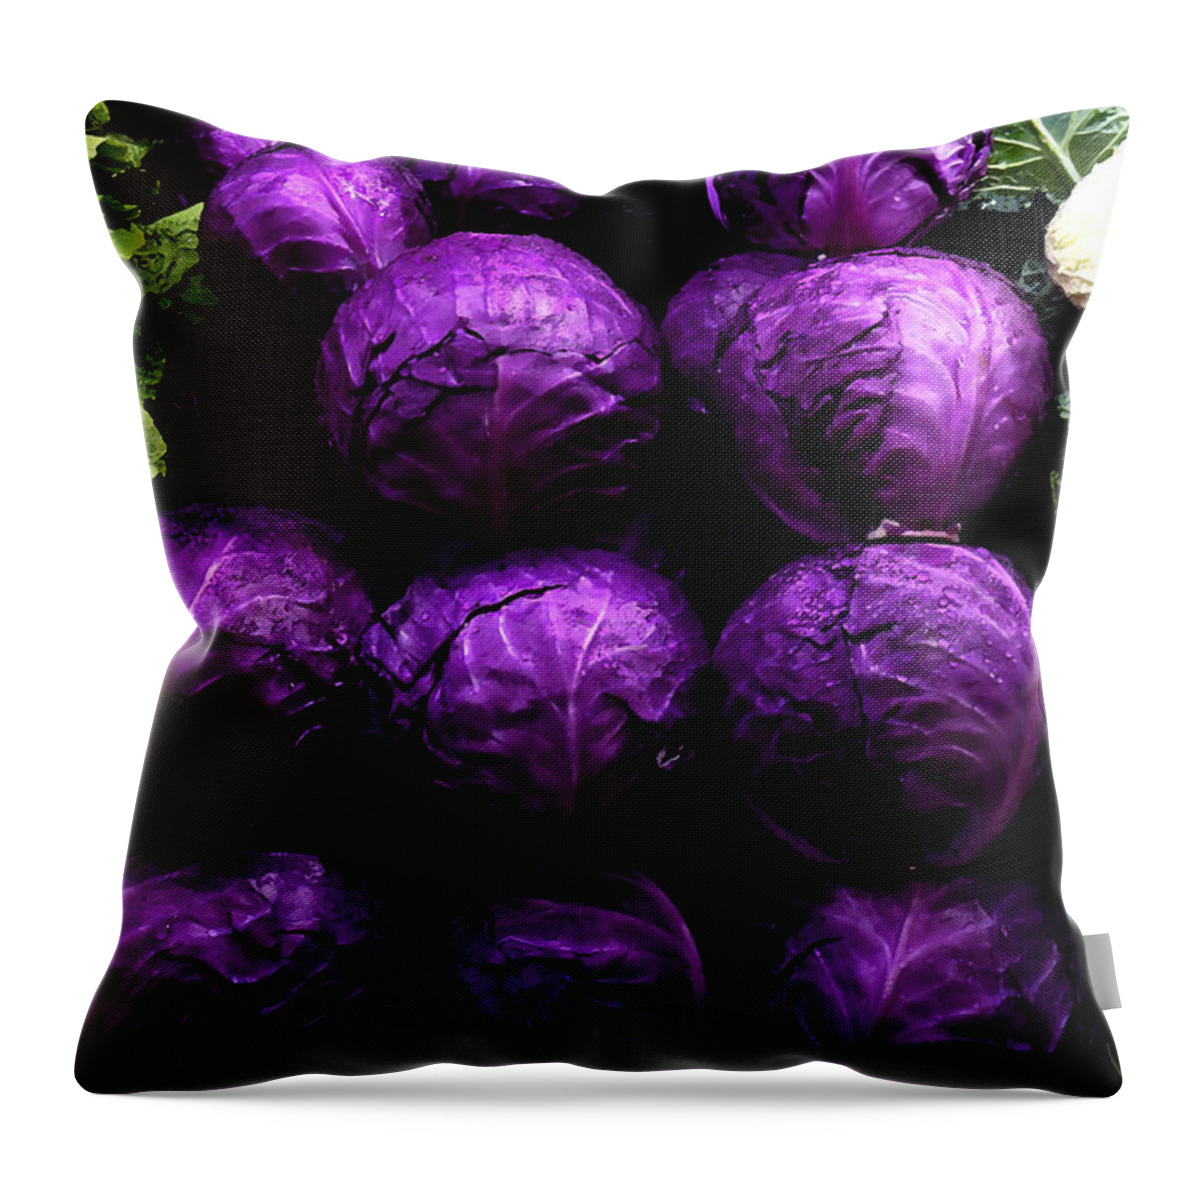 Cabbage Throw Pillow featuring the digital art Cabbages by David Blank